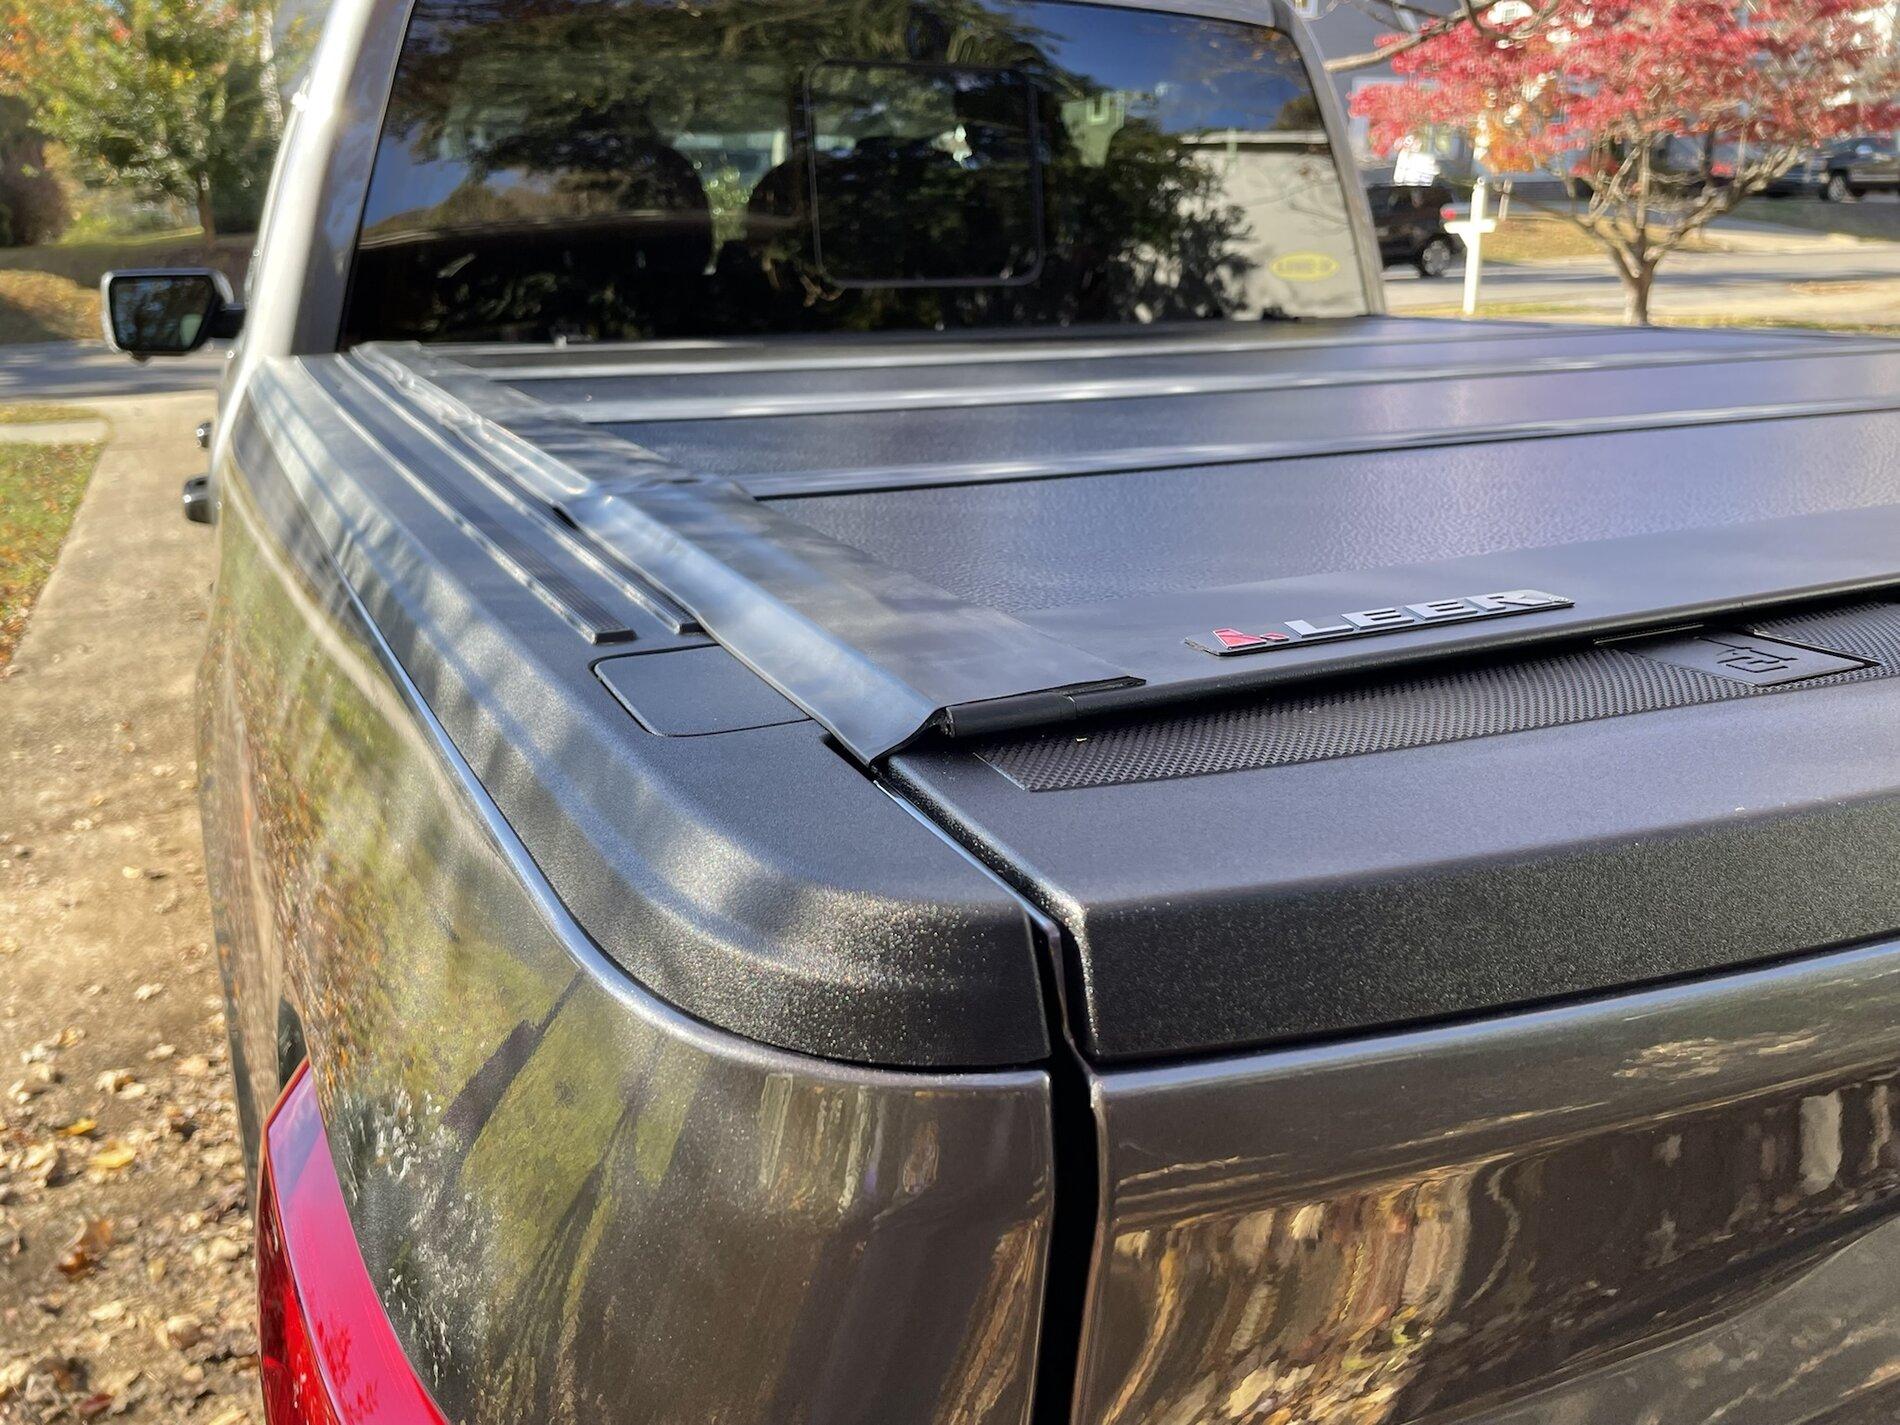 Ford F-150 Lightning Leer HF650M Tonneau Cover Review with Photos! - Install & First Impressions IMG_6475.JPEG